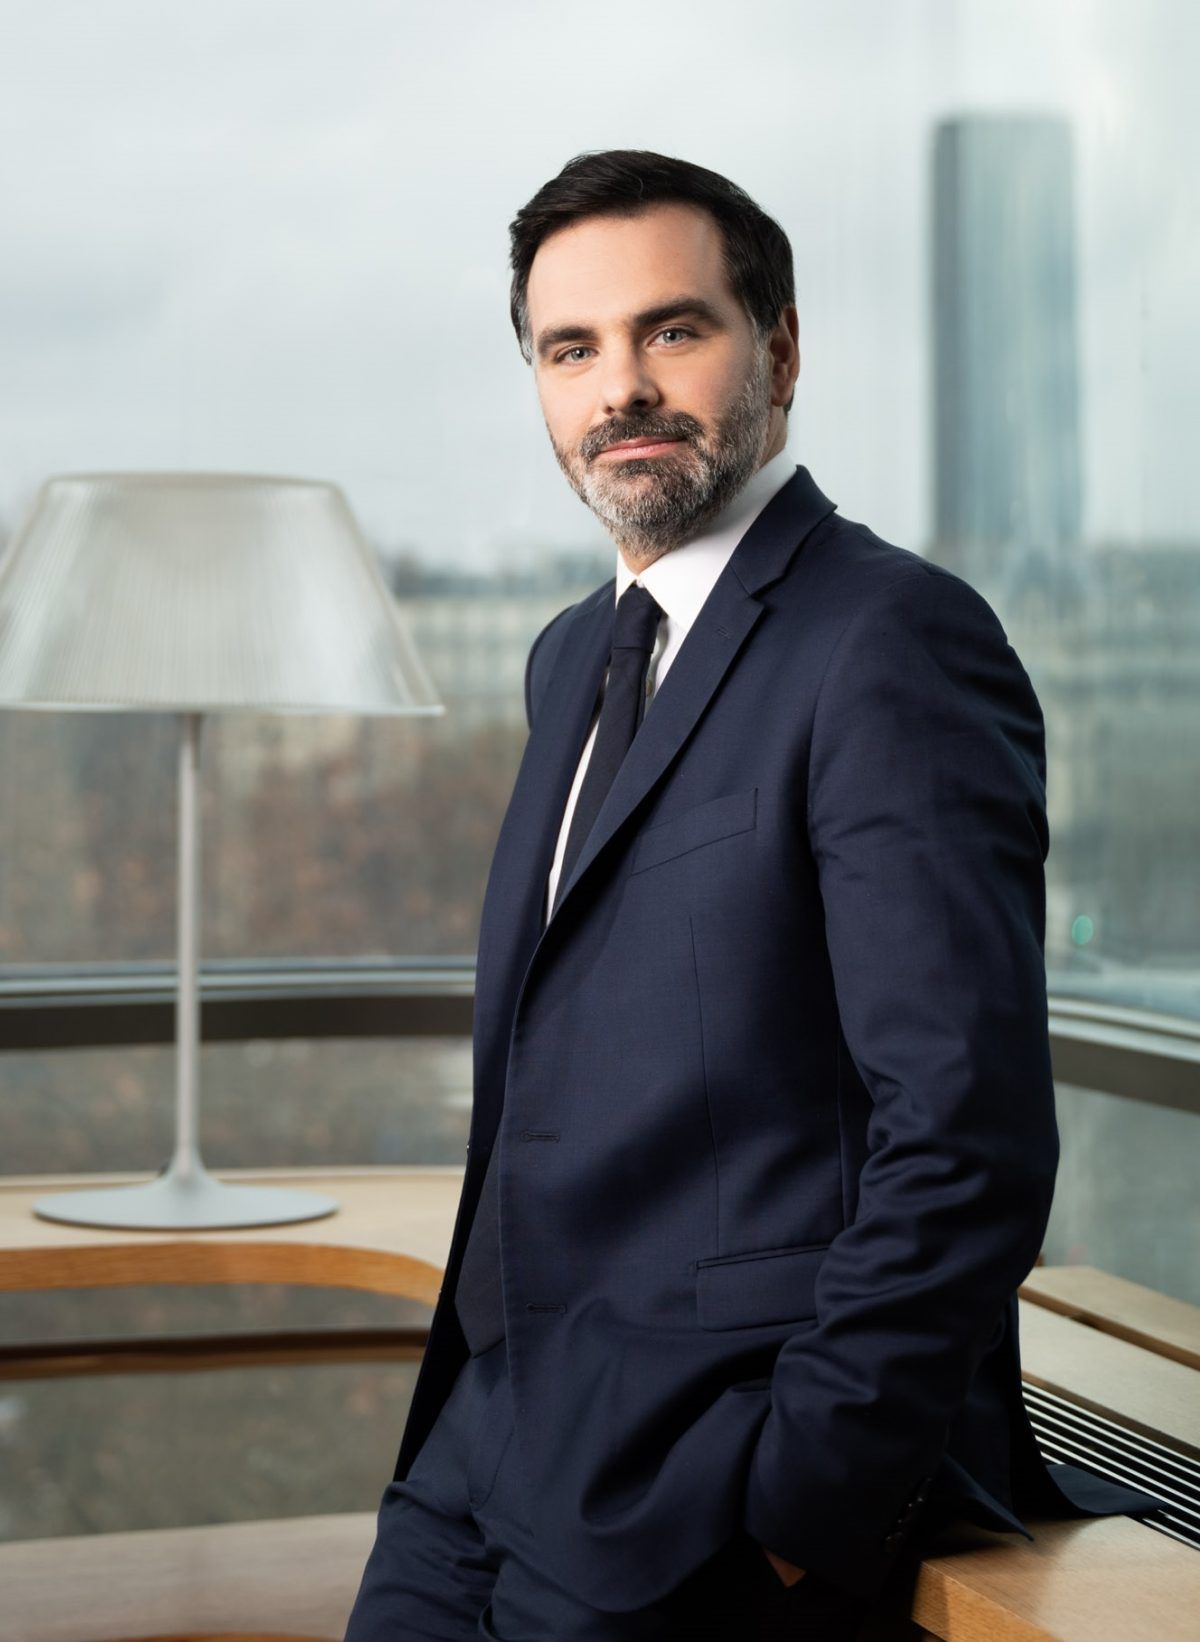 Laurent Saint-Martin appointed Chief Executive Officer of Business France